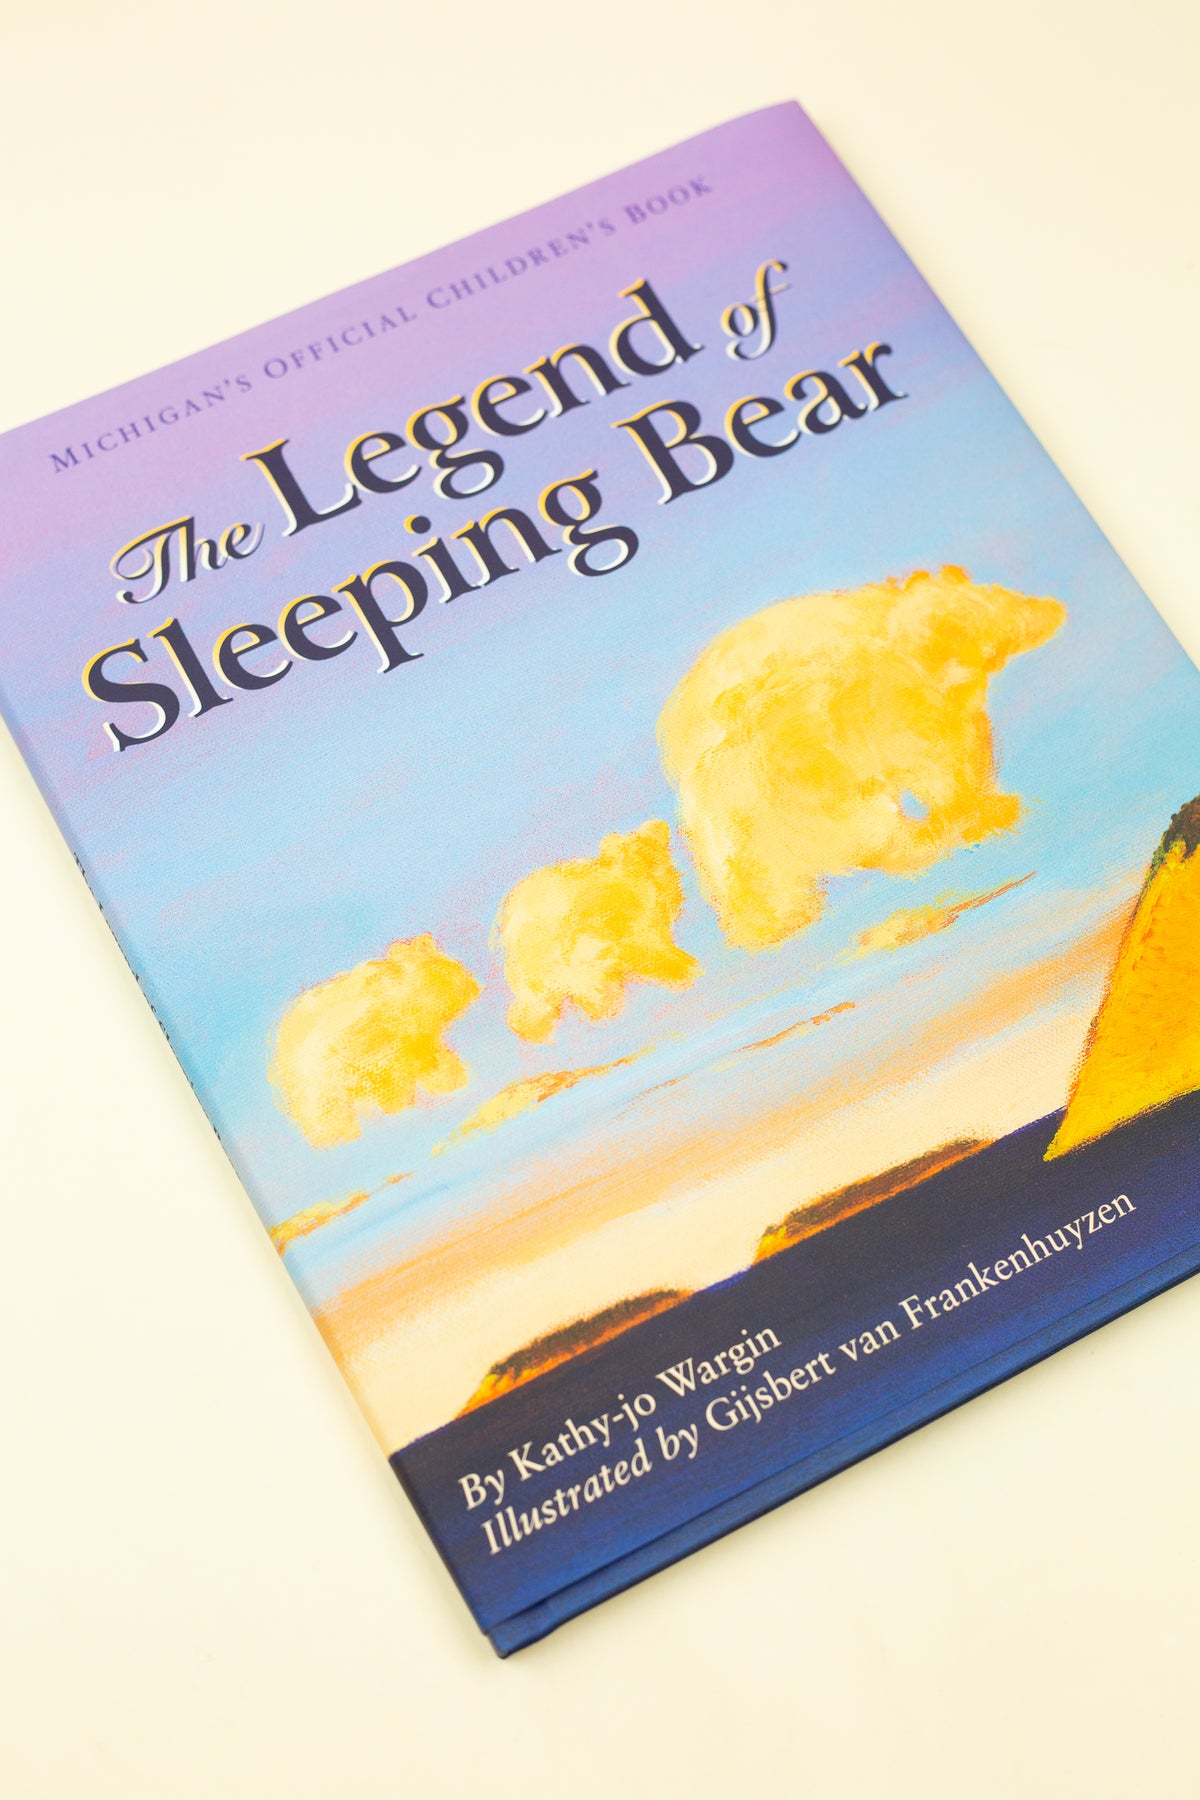 The Legend of the Sleeping Bear Book